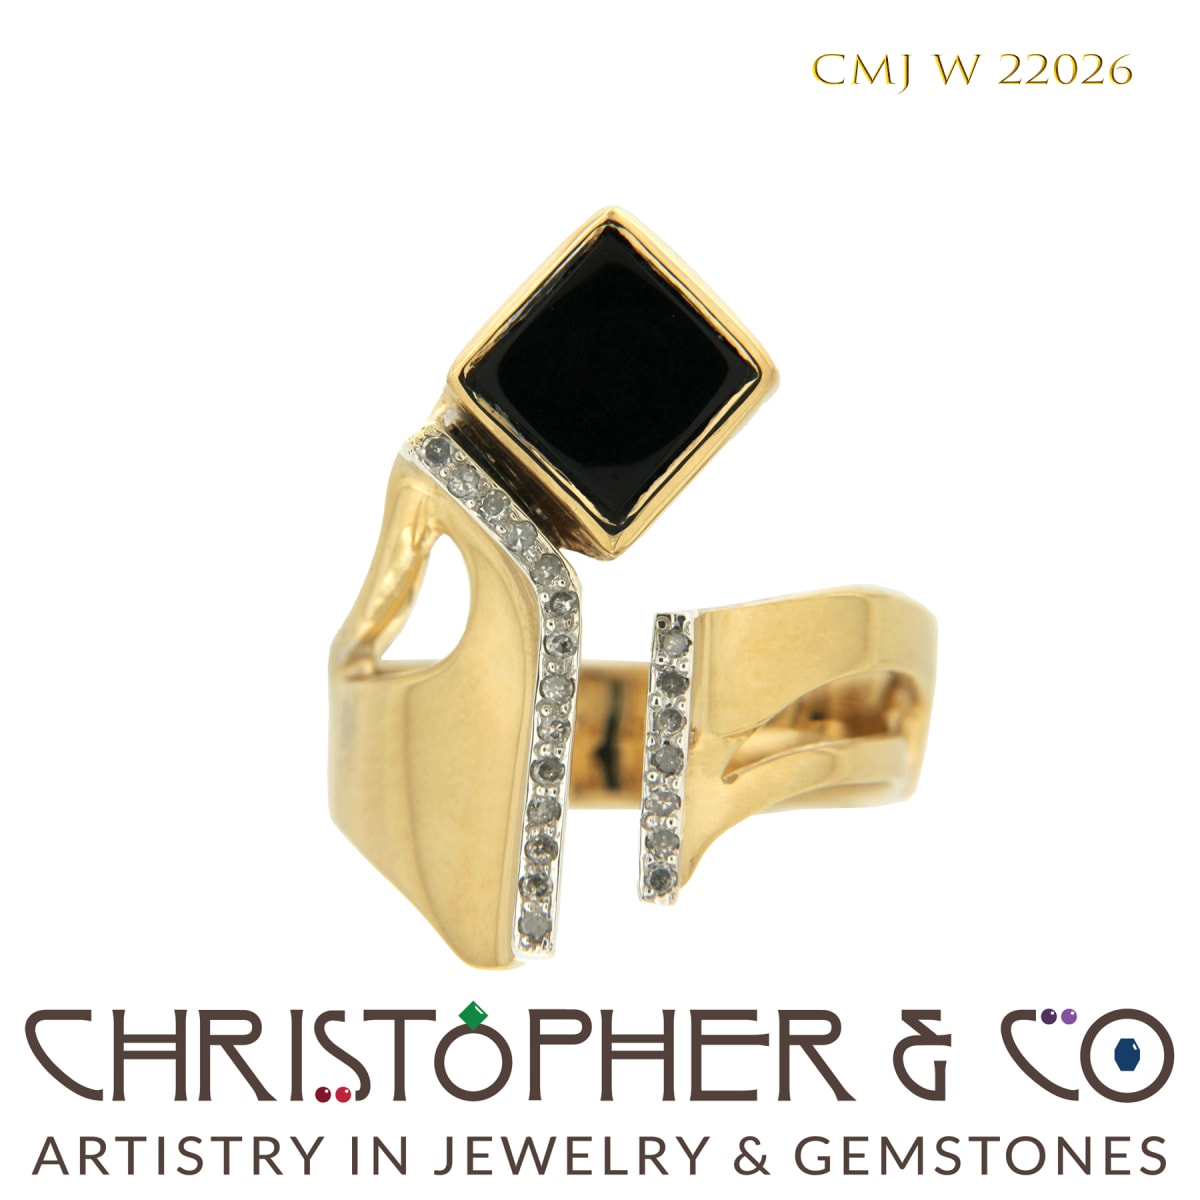 CMJ W 22026  Yellow gold ring designed by Christopher M. Jupp set with onyx and diamonds. by Christopher M. Jupp  Image: CMJ W 22026  Yellow gold ring designed by Christopher M. Jupp set with onyx and diamonds.